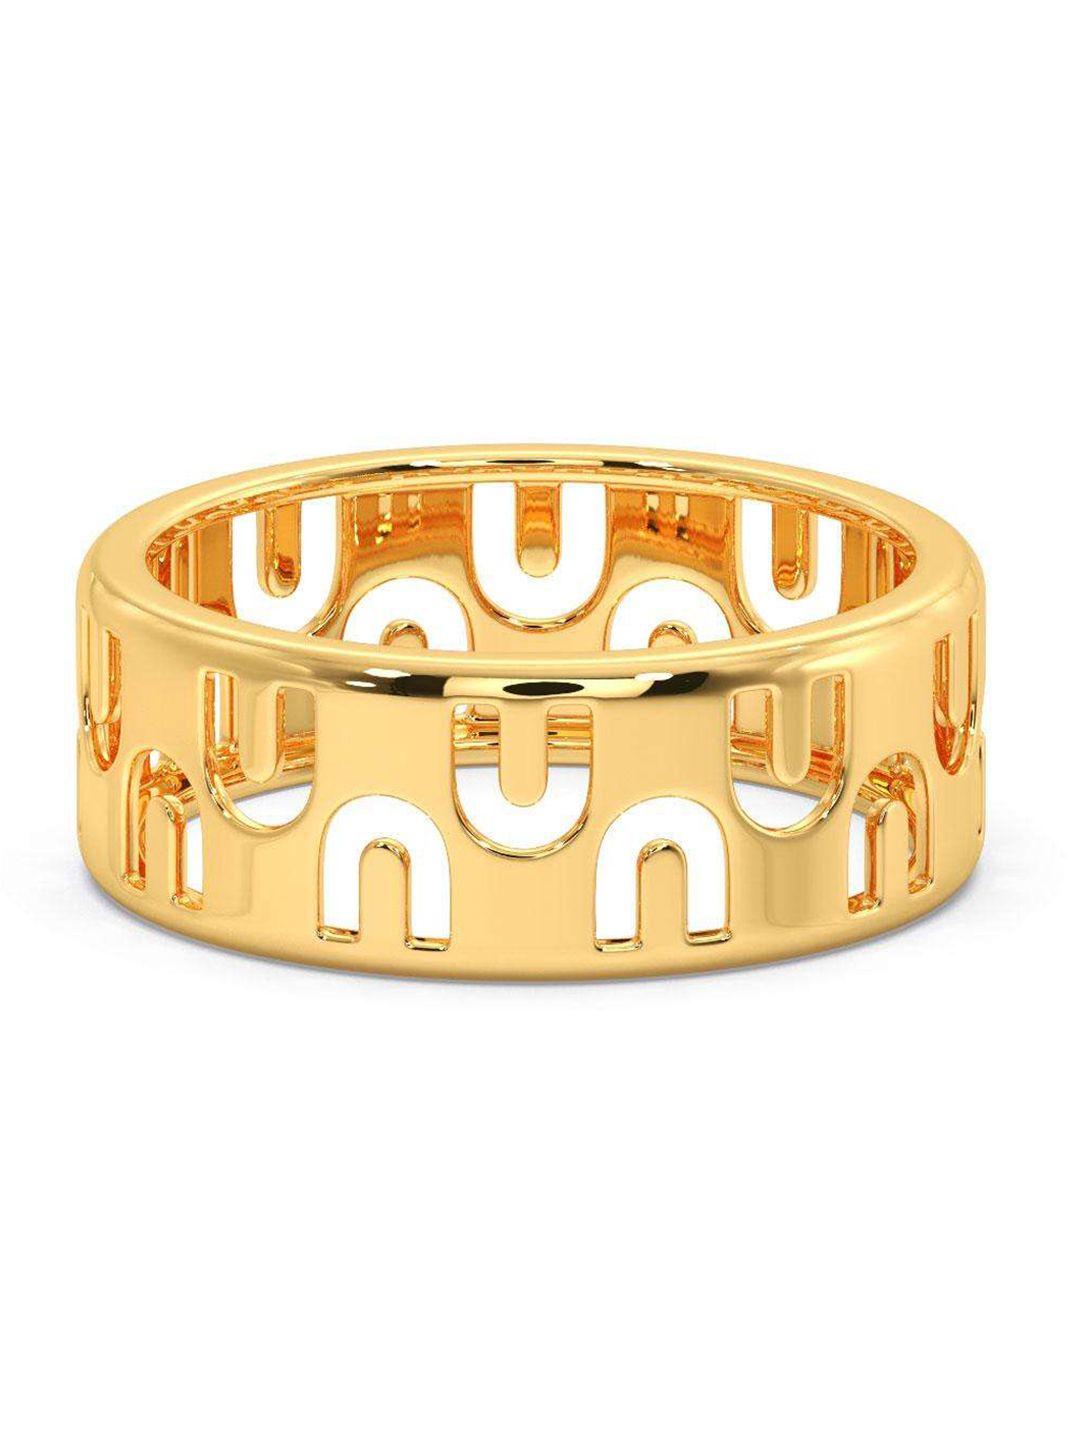 candere-a-kalyan-jewellers-company-men-18kt-bis-hallmark-yellow-gold-ring--3.61-gm